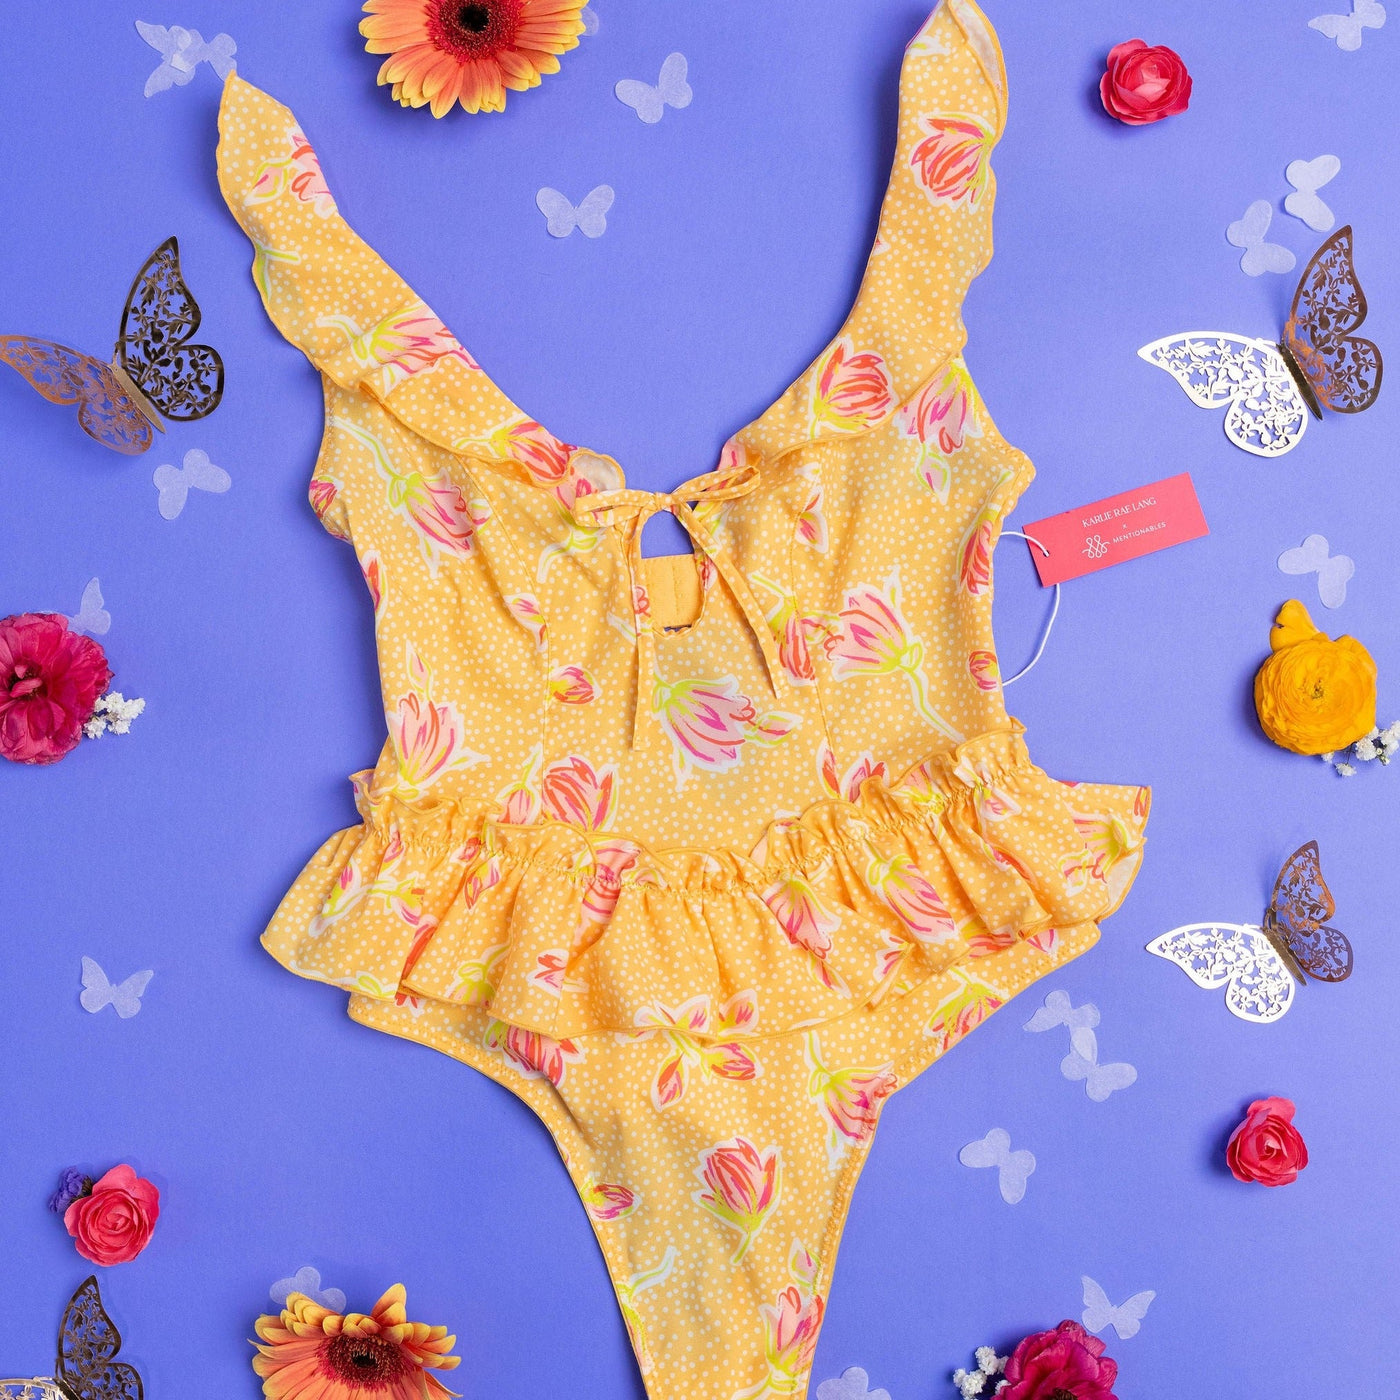 Karlie's Floral Ruffle Teddy - Mentionables